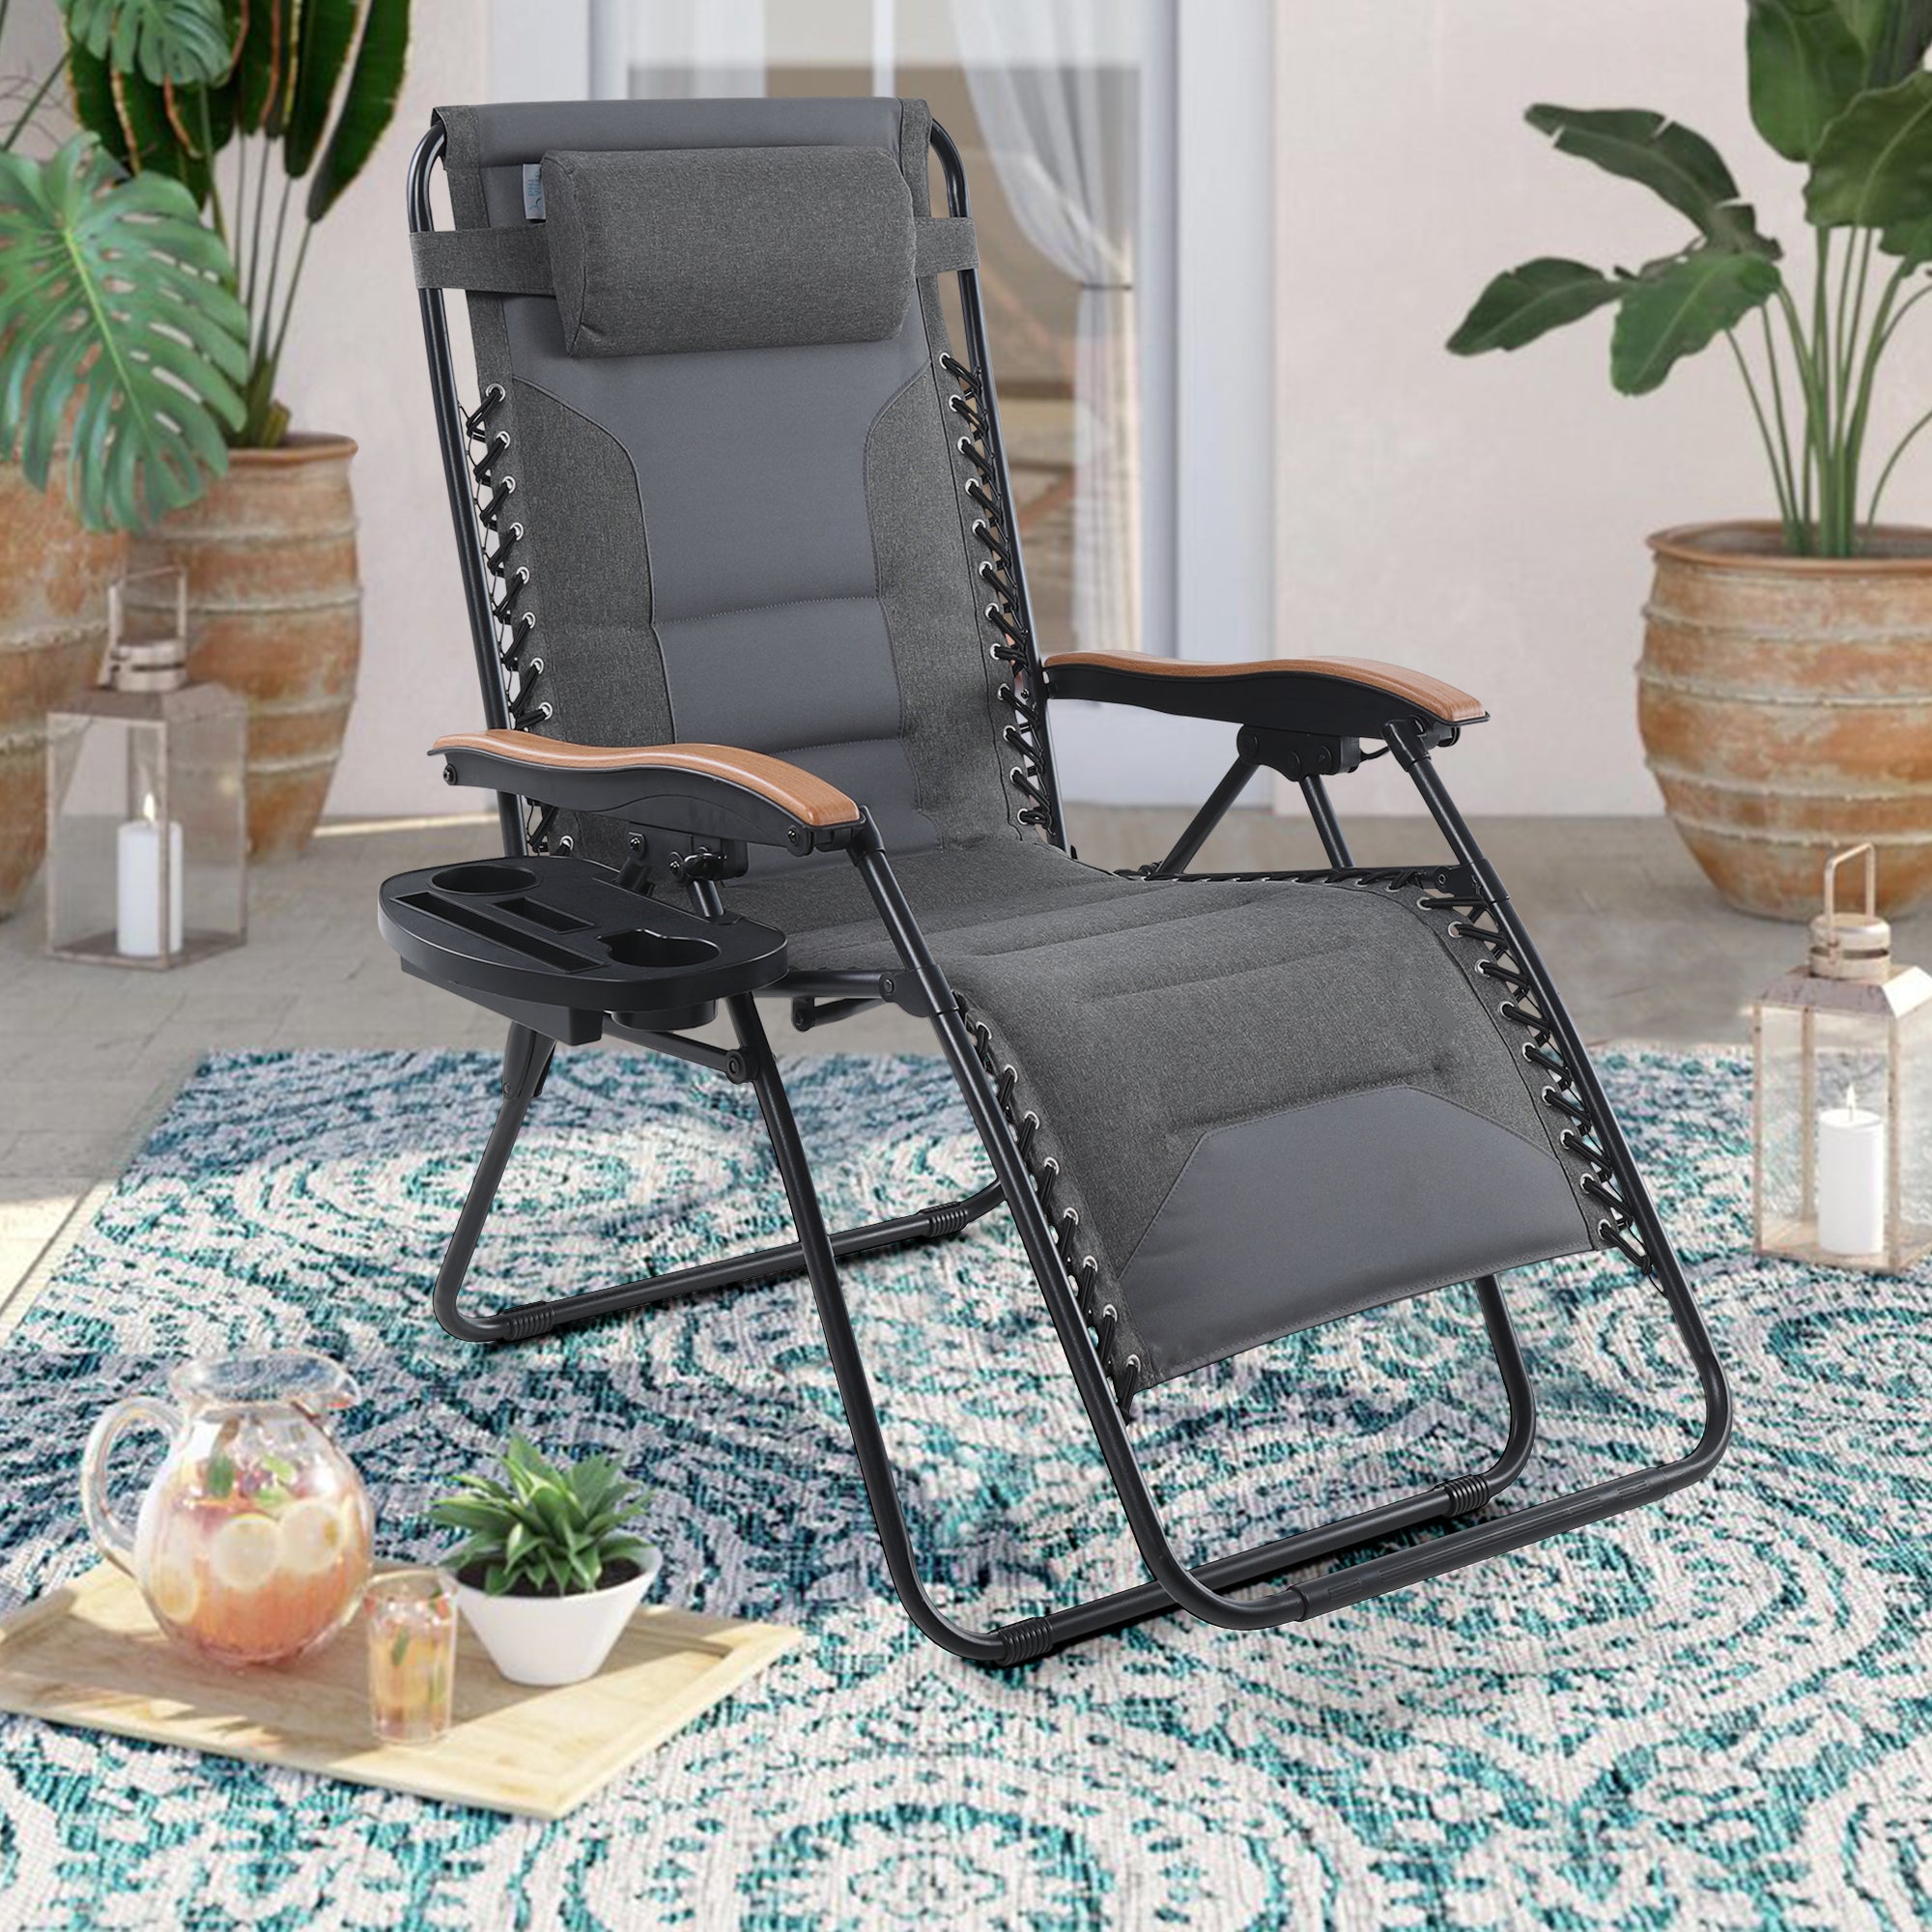 MFSTUDIO New Fabric Oversize Padded Zero Gravity Lounge Chair with Cup Holder